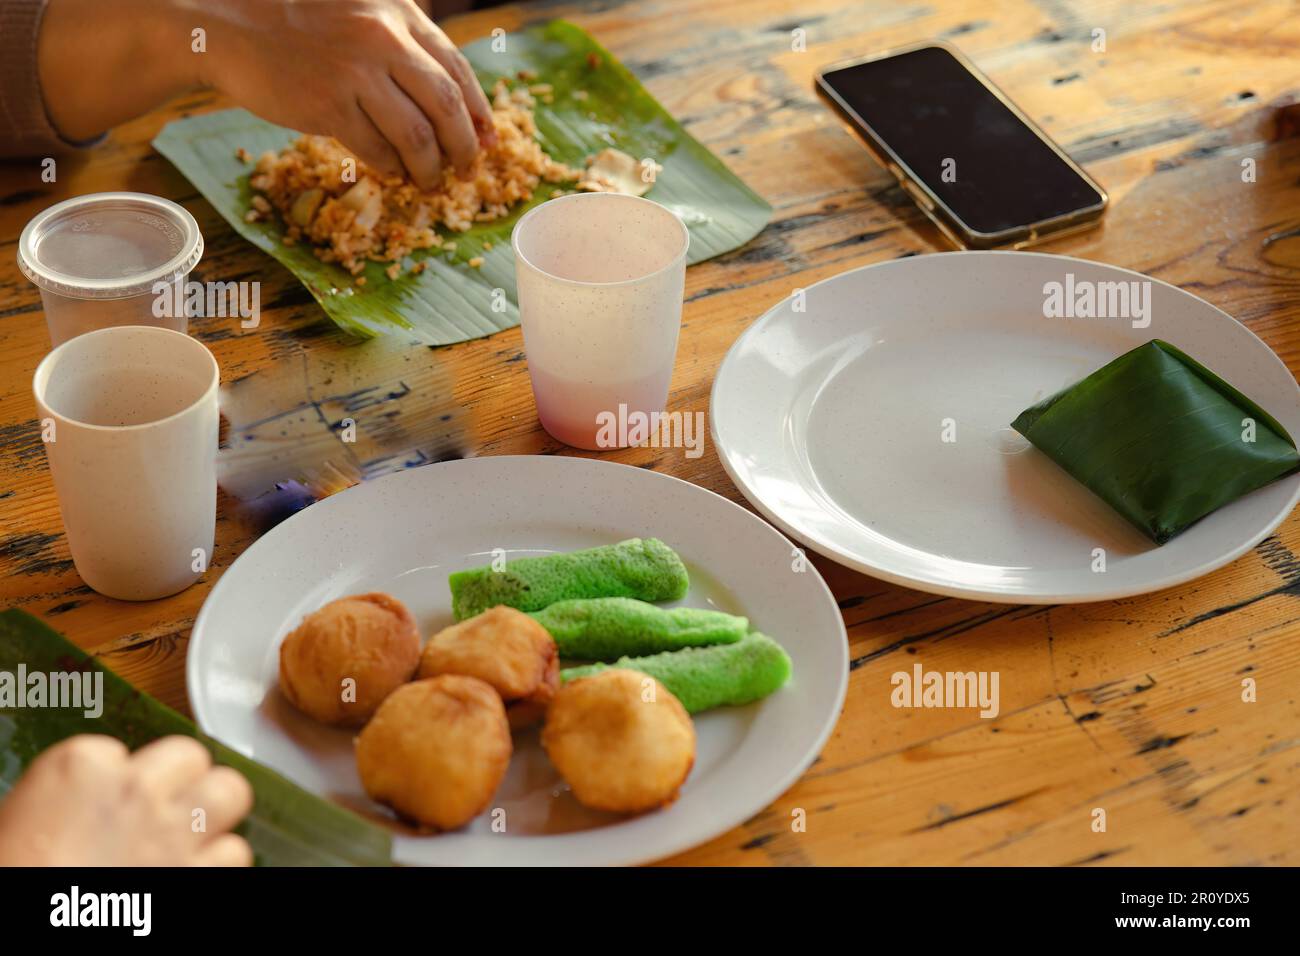 Malaysian staple breakfast on the table. Nasi lemak with Sweet desserts with coconut known as kuih ketayap and burger mini. Stock Photo